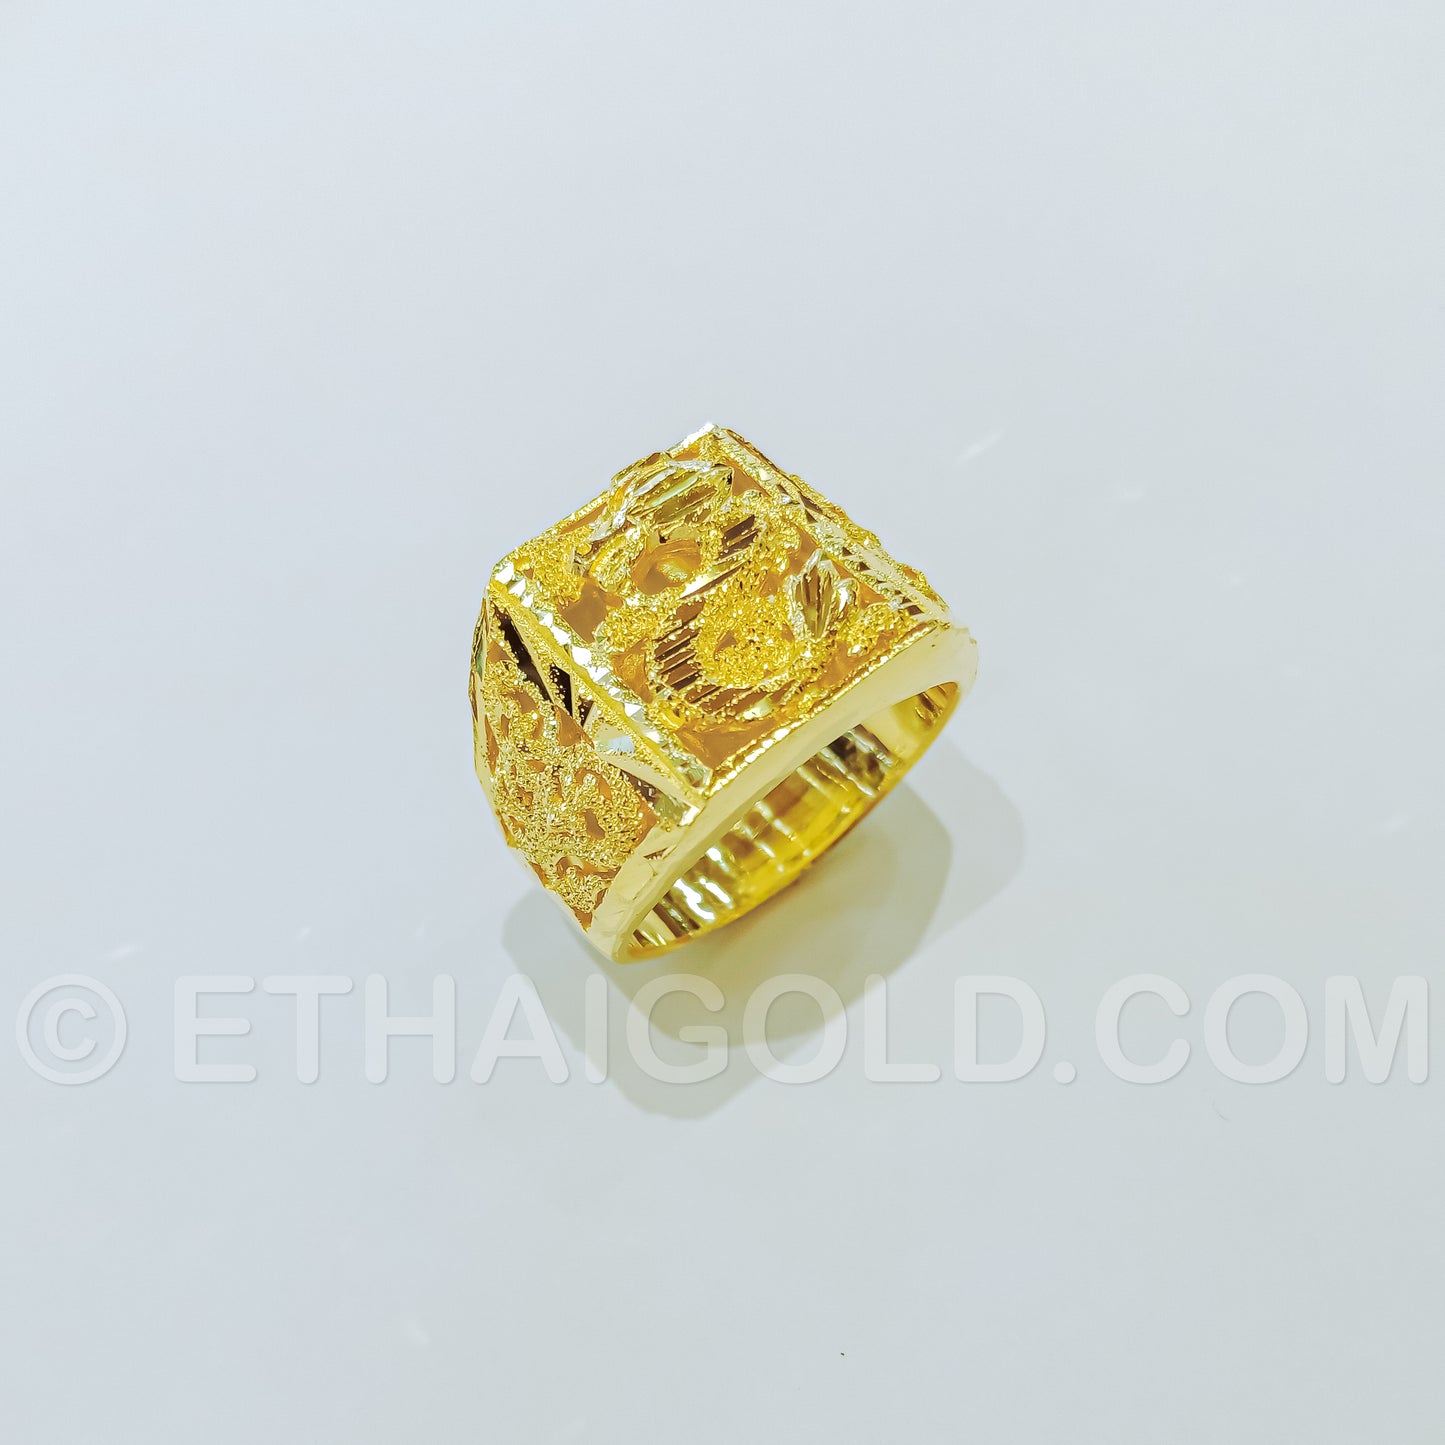 1/2 BAHT POLISHED SPARKLING DIAMOND-CUT SOLID SQUARE DRAGON RING IN 23K GOLD (ID: R1202S)